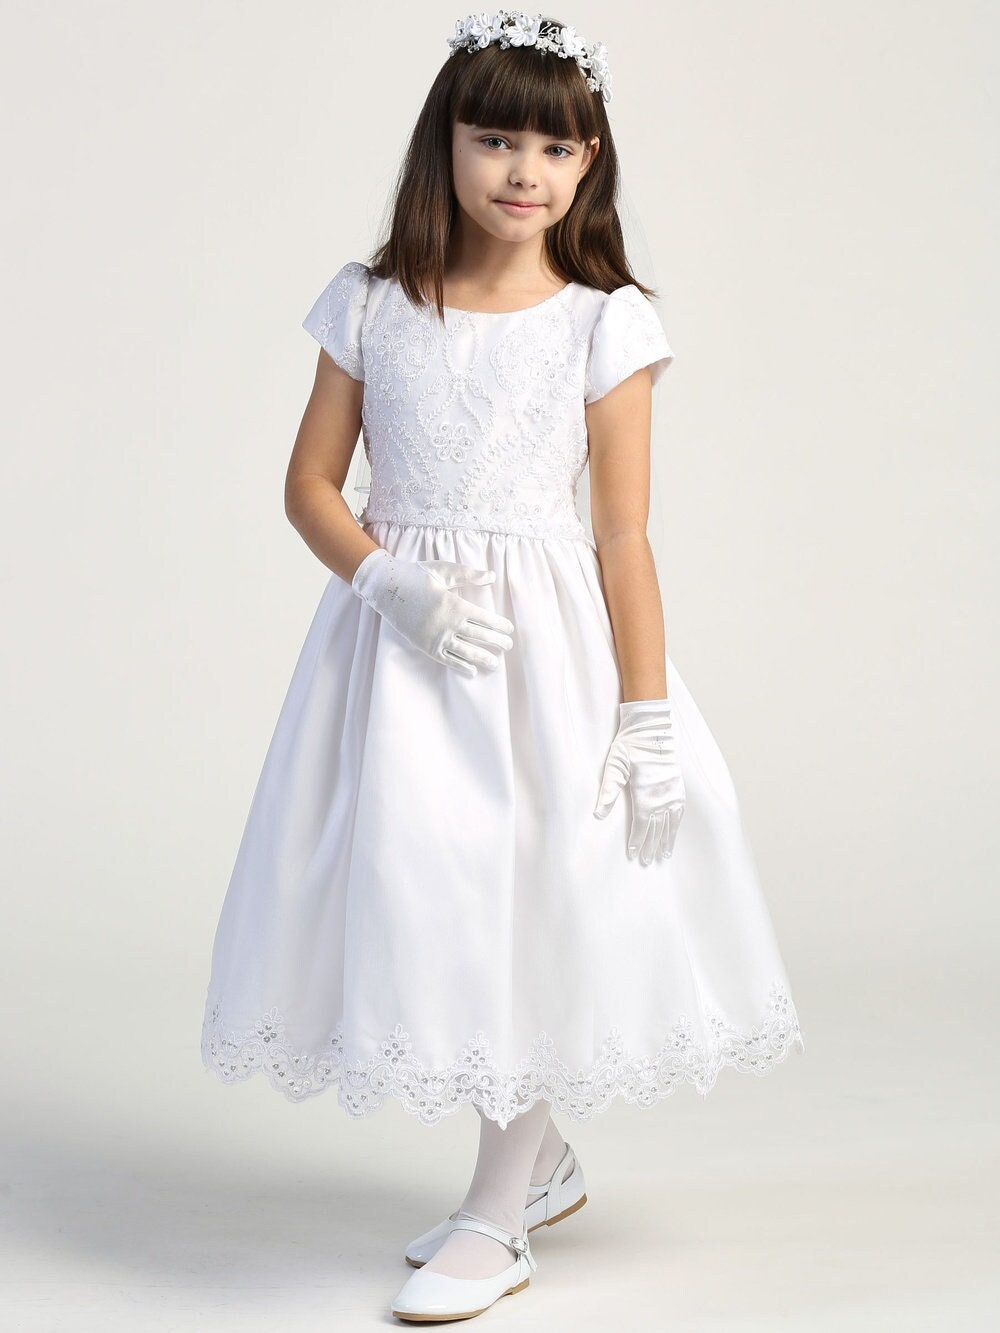 A girl wearing a stunning white First Communion Dress with embroidered lace and sequins on the tulle bodice. 